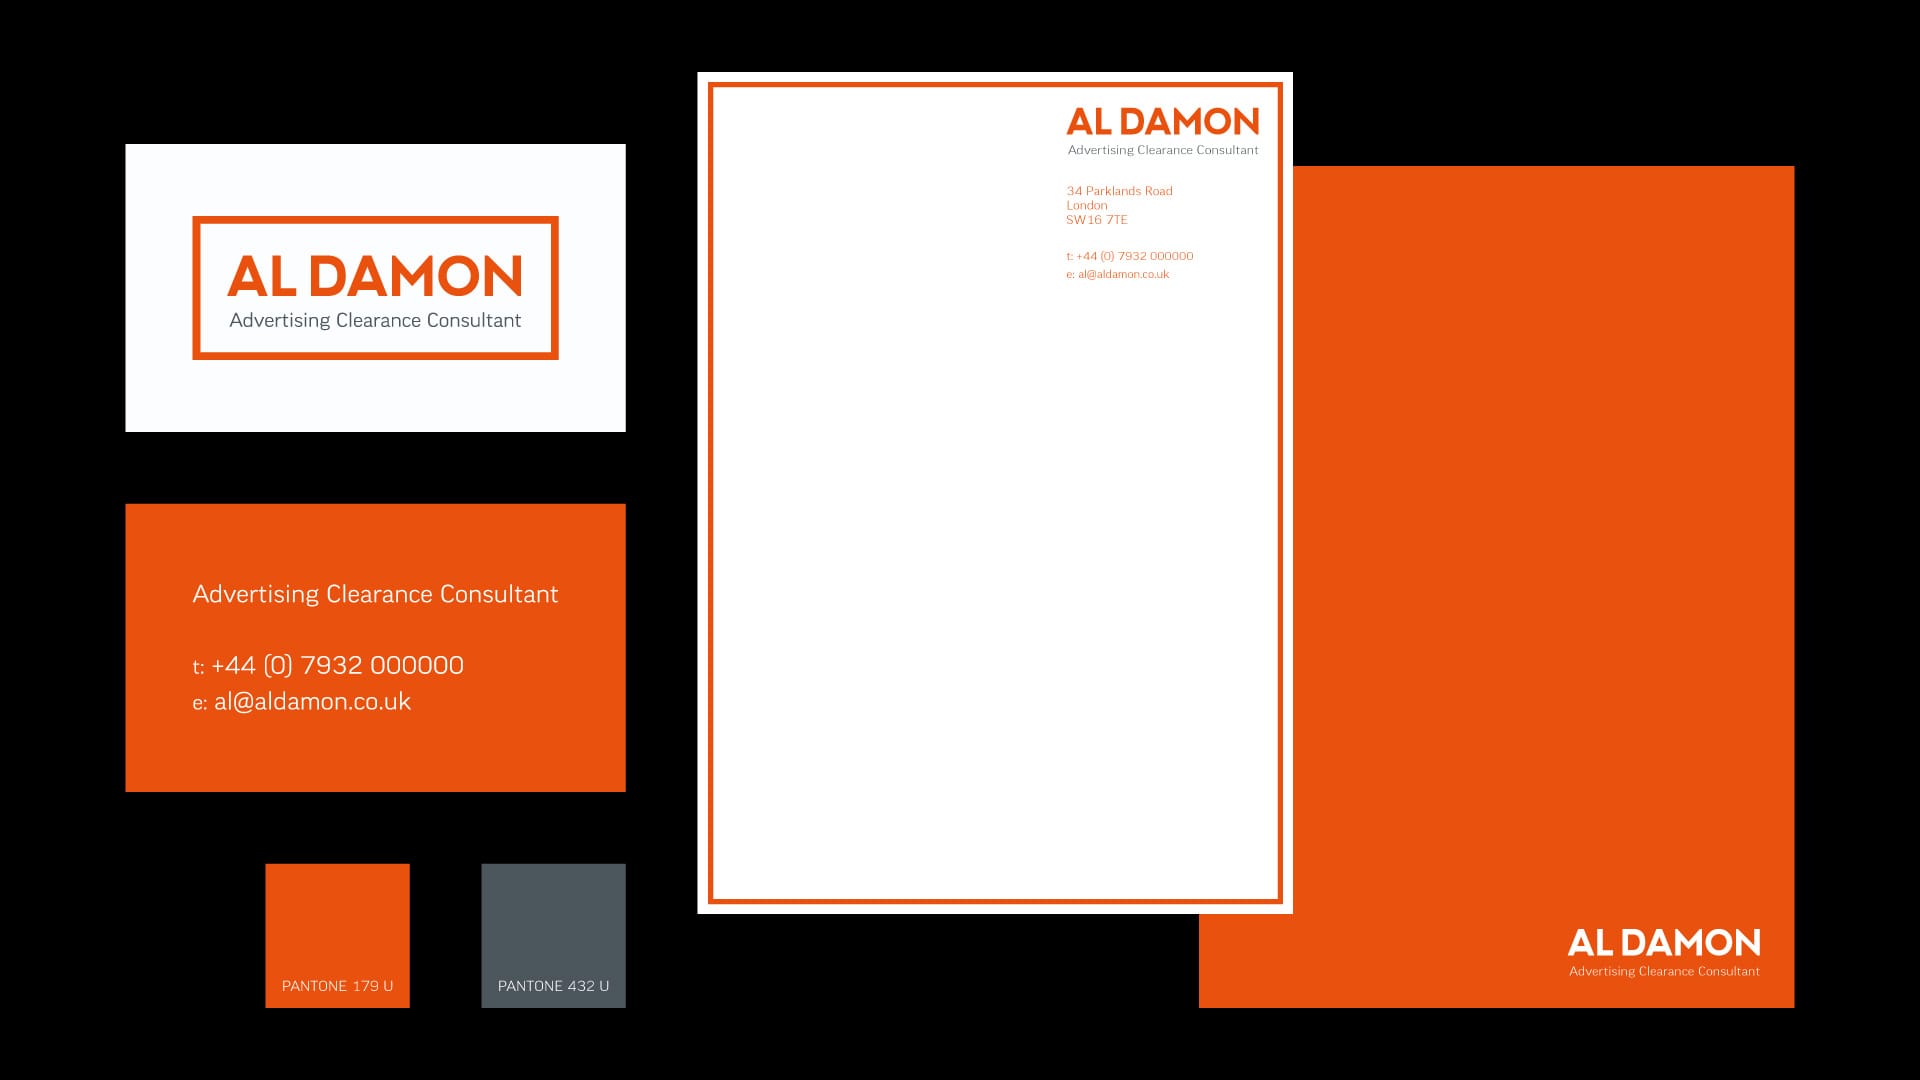 Branding collateral for Al Damon copy clearance consultant, business cards and letterhead